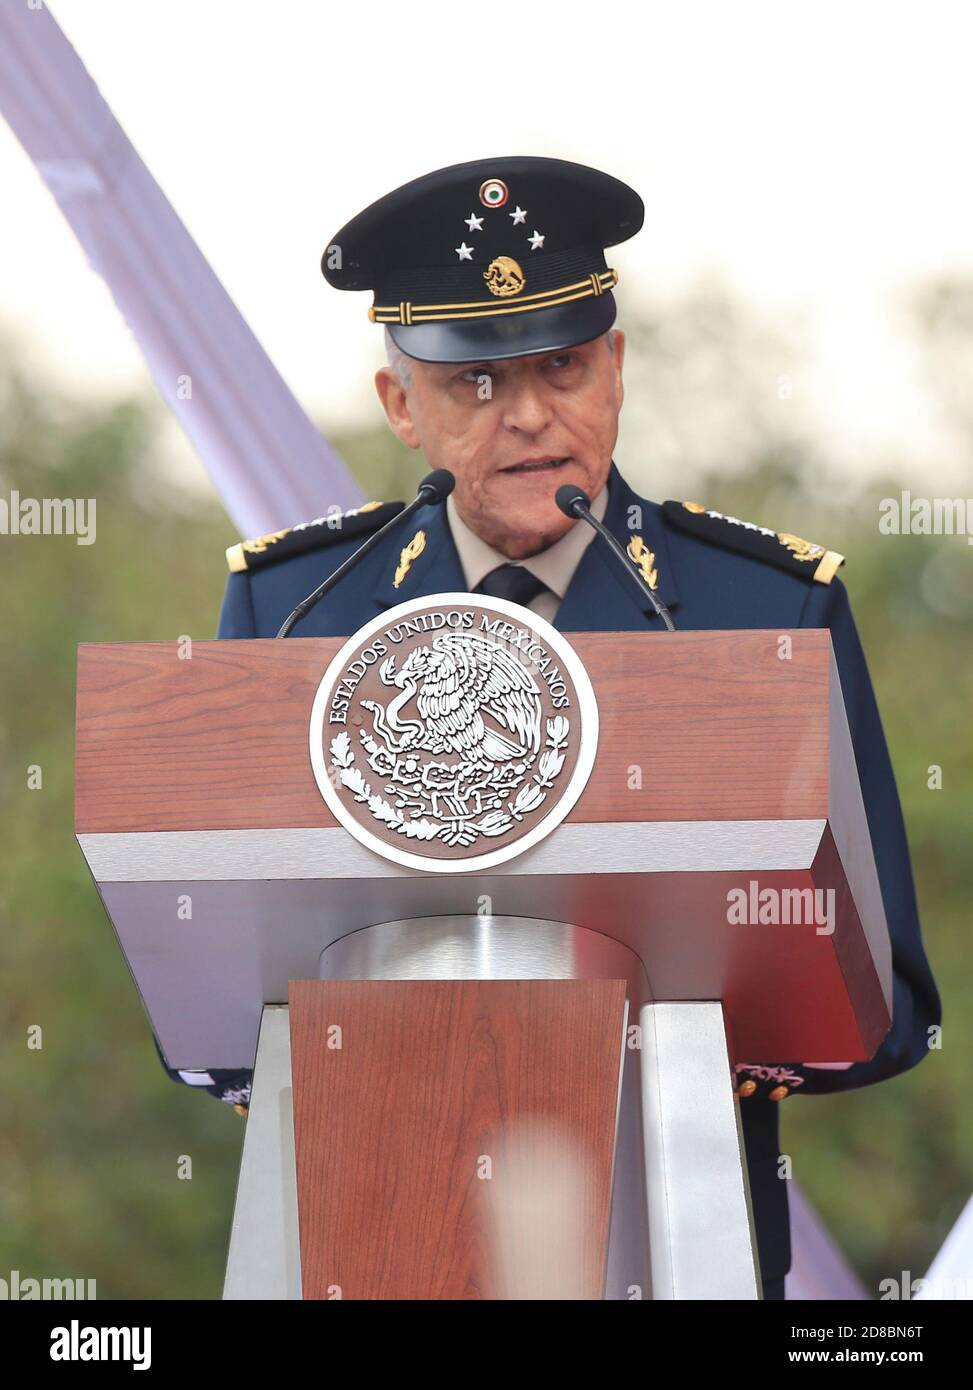 Mexican Defense Minister Gen. Salvador Cienfuegos Zepeda delivers an address during ceremony marking the 105th Anniversary of the Loyalty March February 9, 2018 in Mexico City, Mexico. Cienfuegos was arrested October 16, 2020 at Los Angeles International Airport and charged with drug-related corruption. Stock Photo